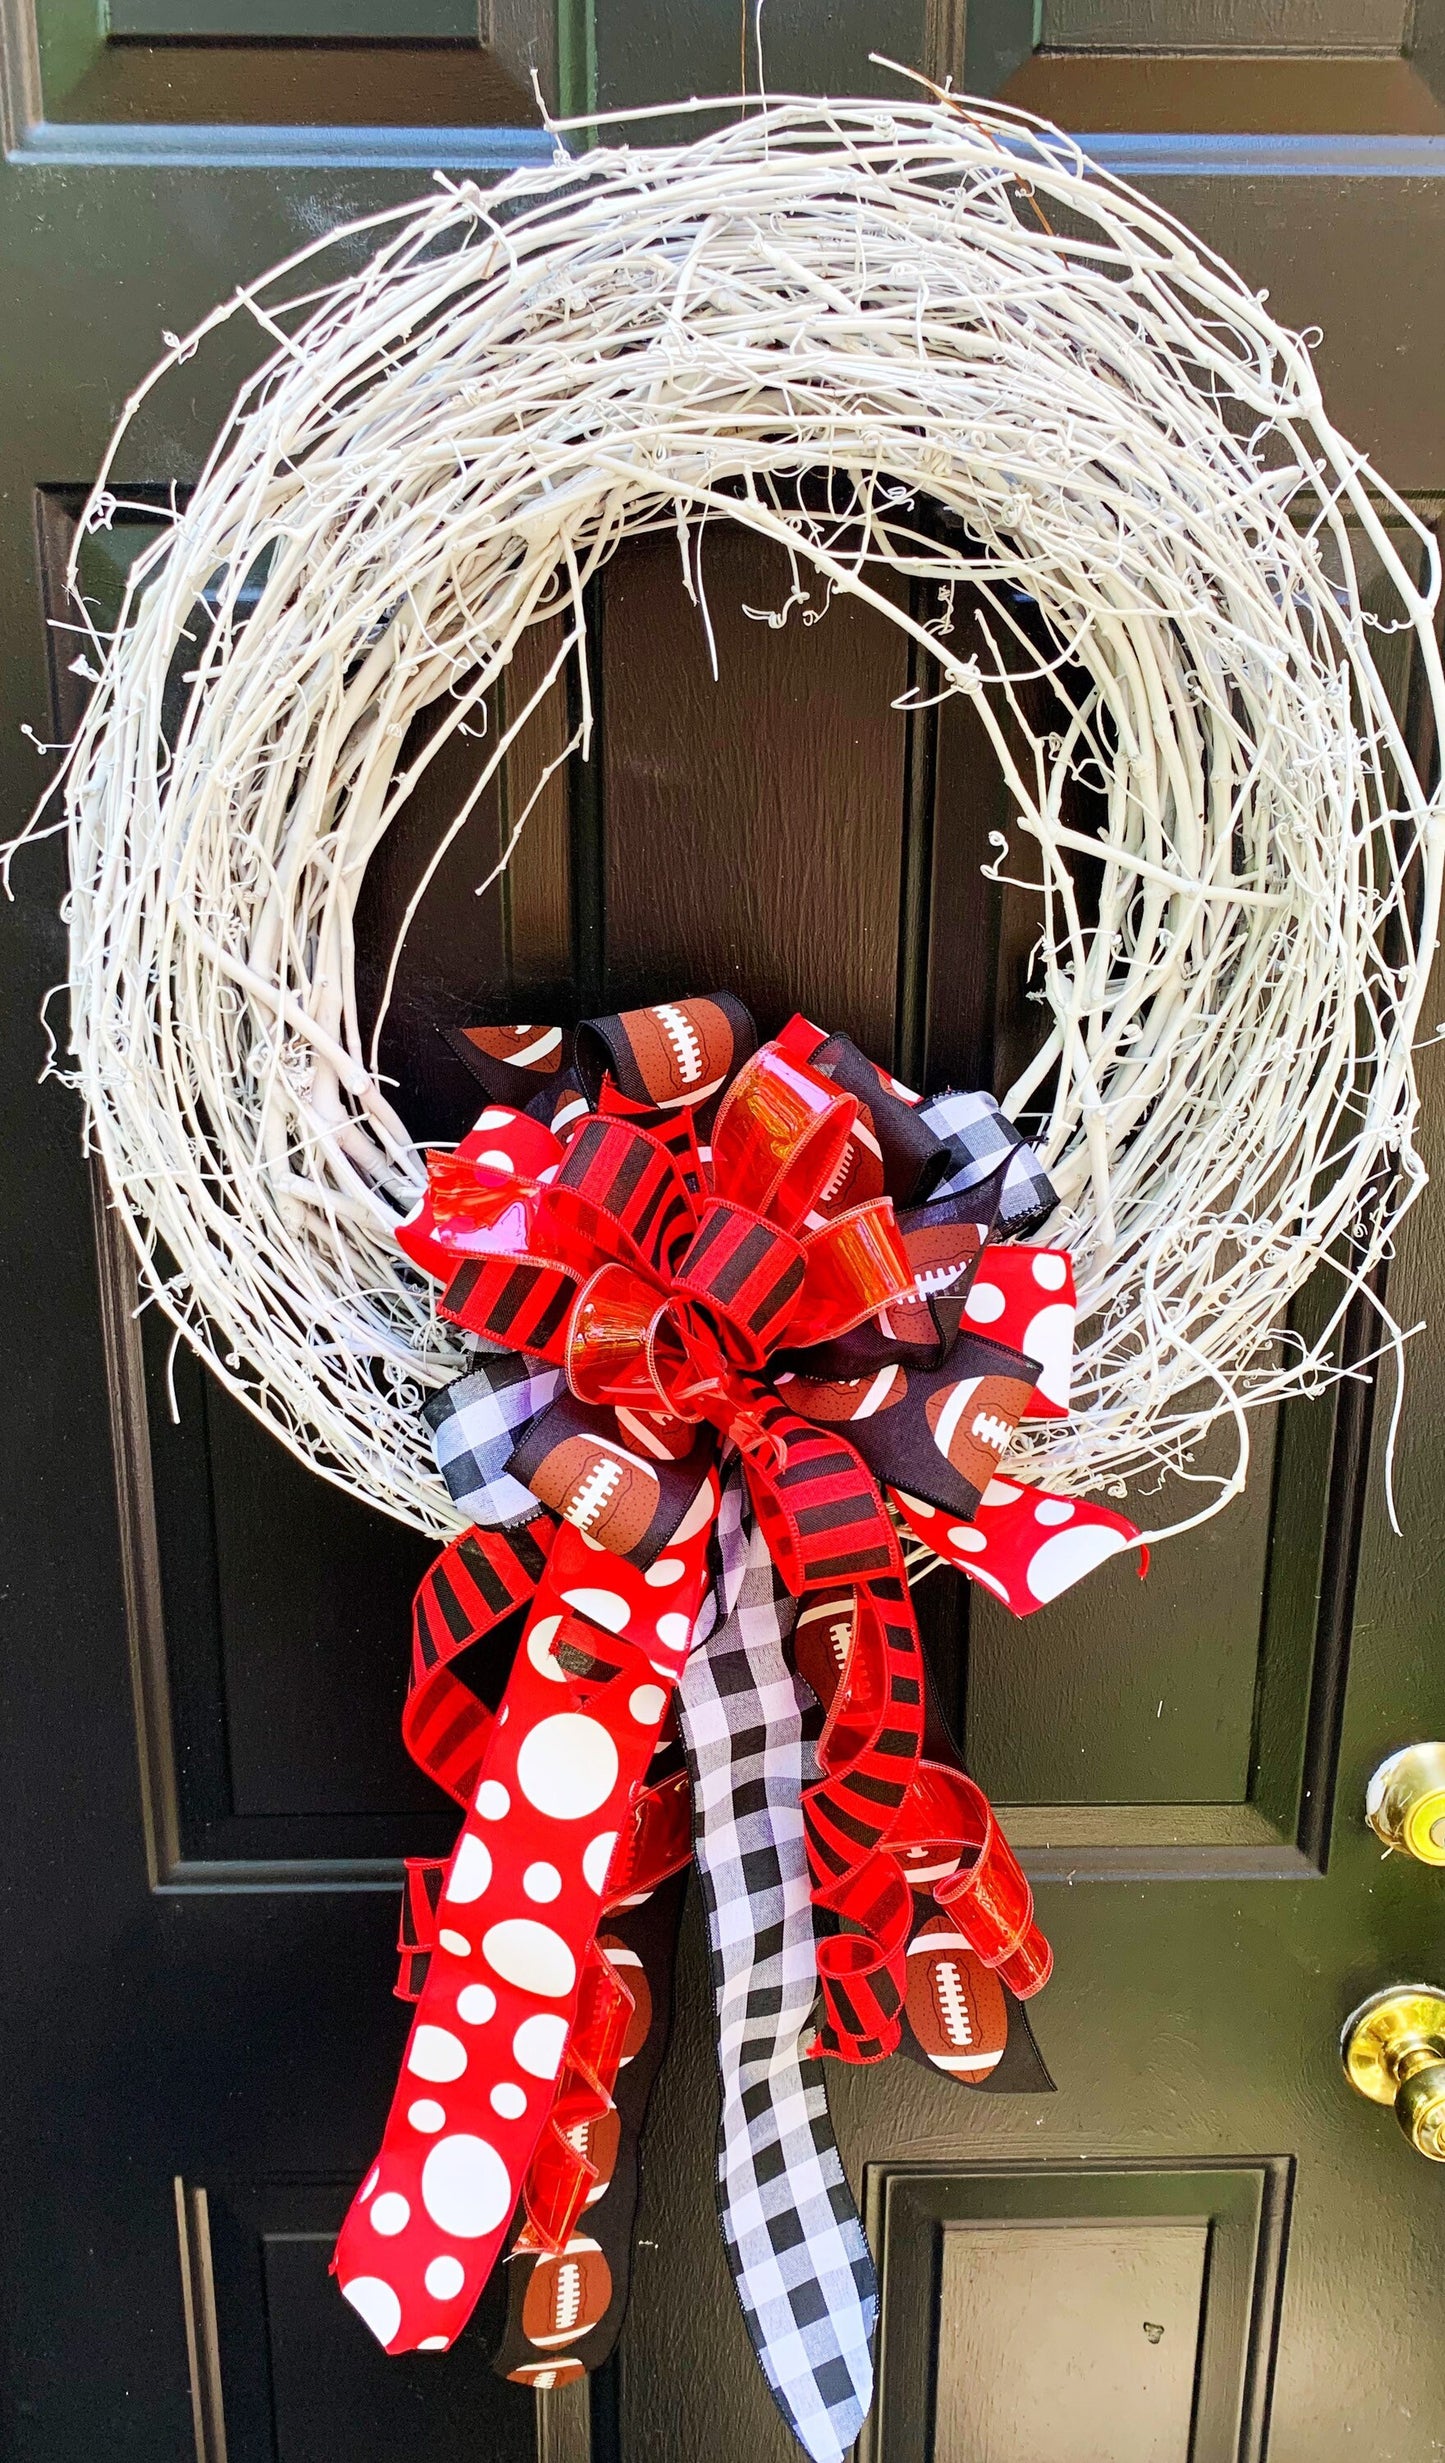 Sports Collection - Red, Black and White Bow, Sports Bow, Football Bow, Football Decor, Sports Decor, Bow, Bows, Mailbox Bow, Wreath Bow